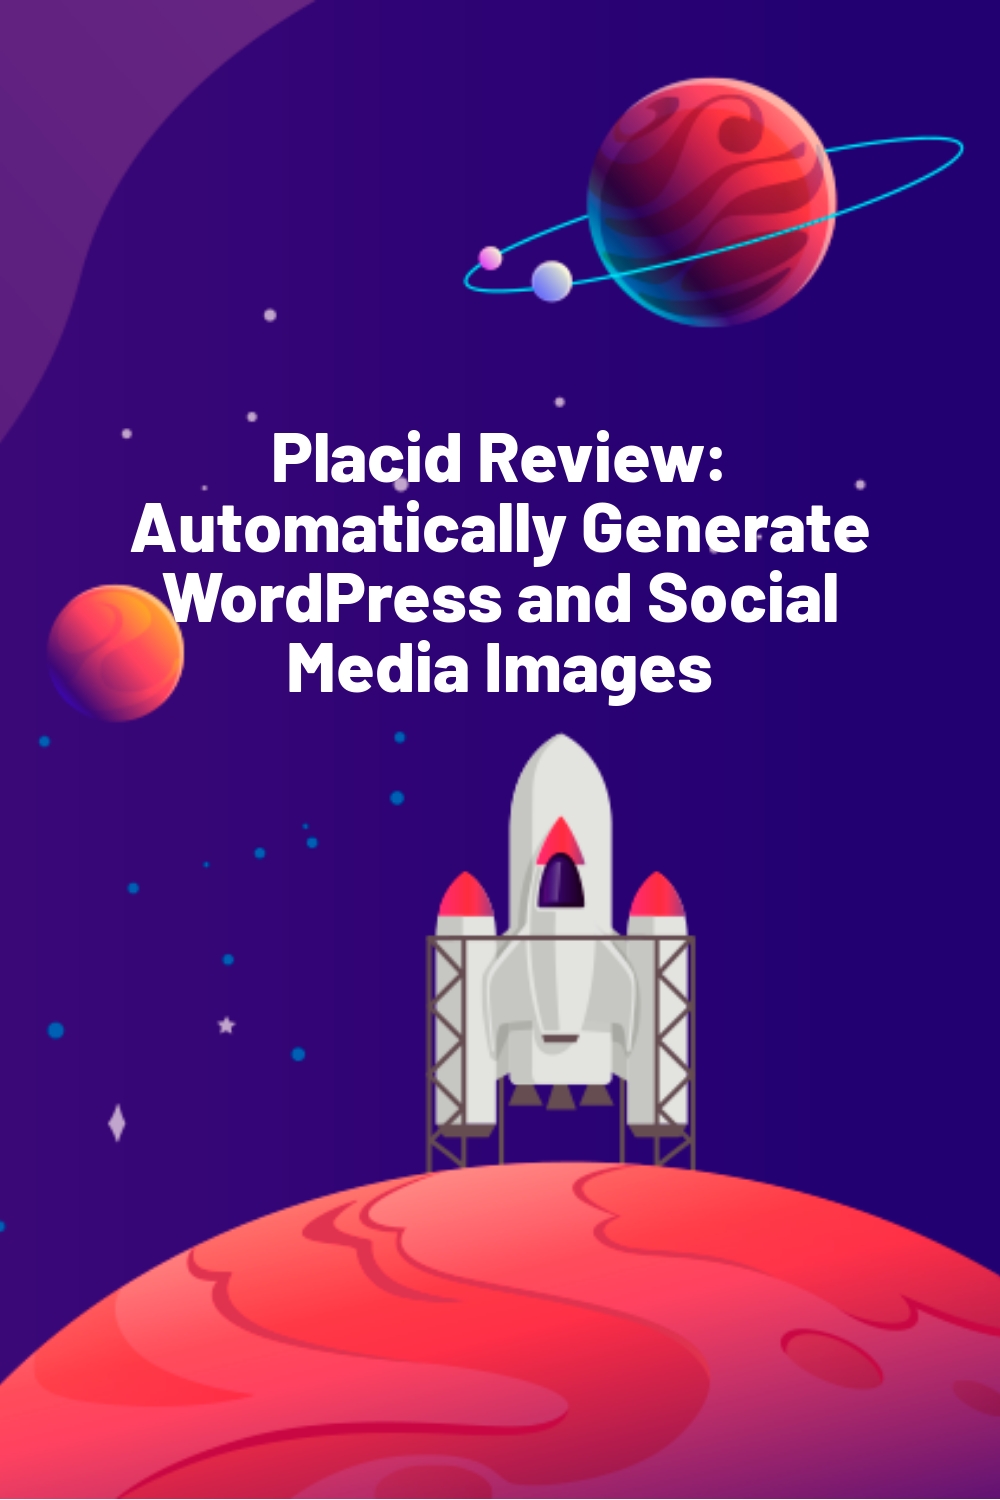 Placid Review: Automatically Generate WordPress and Social Media Images